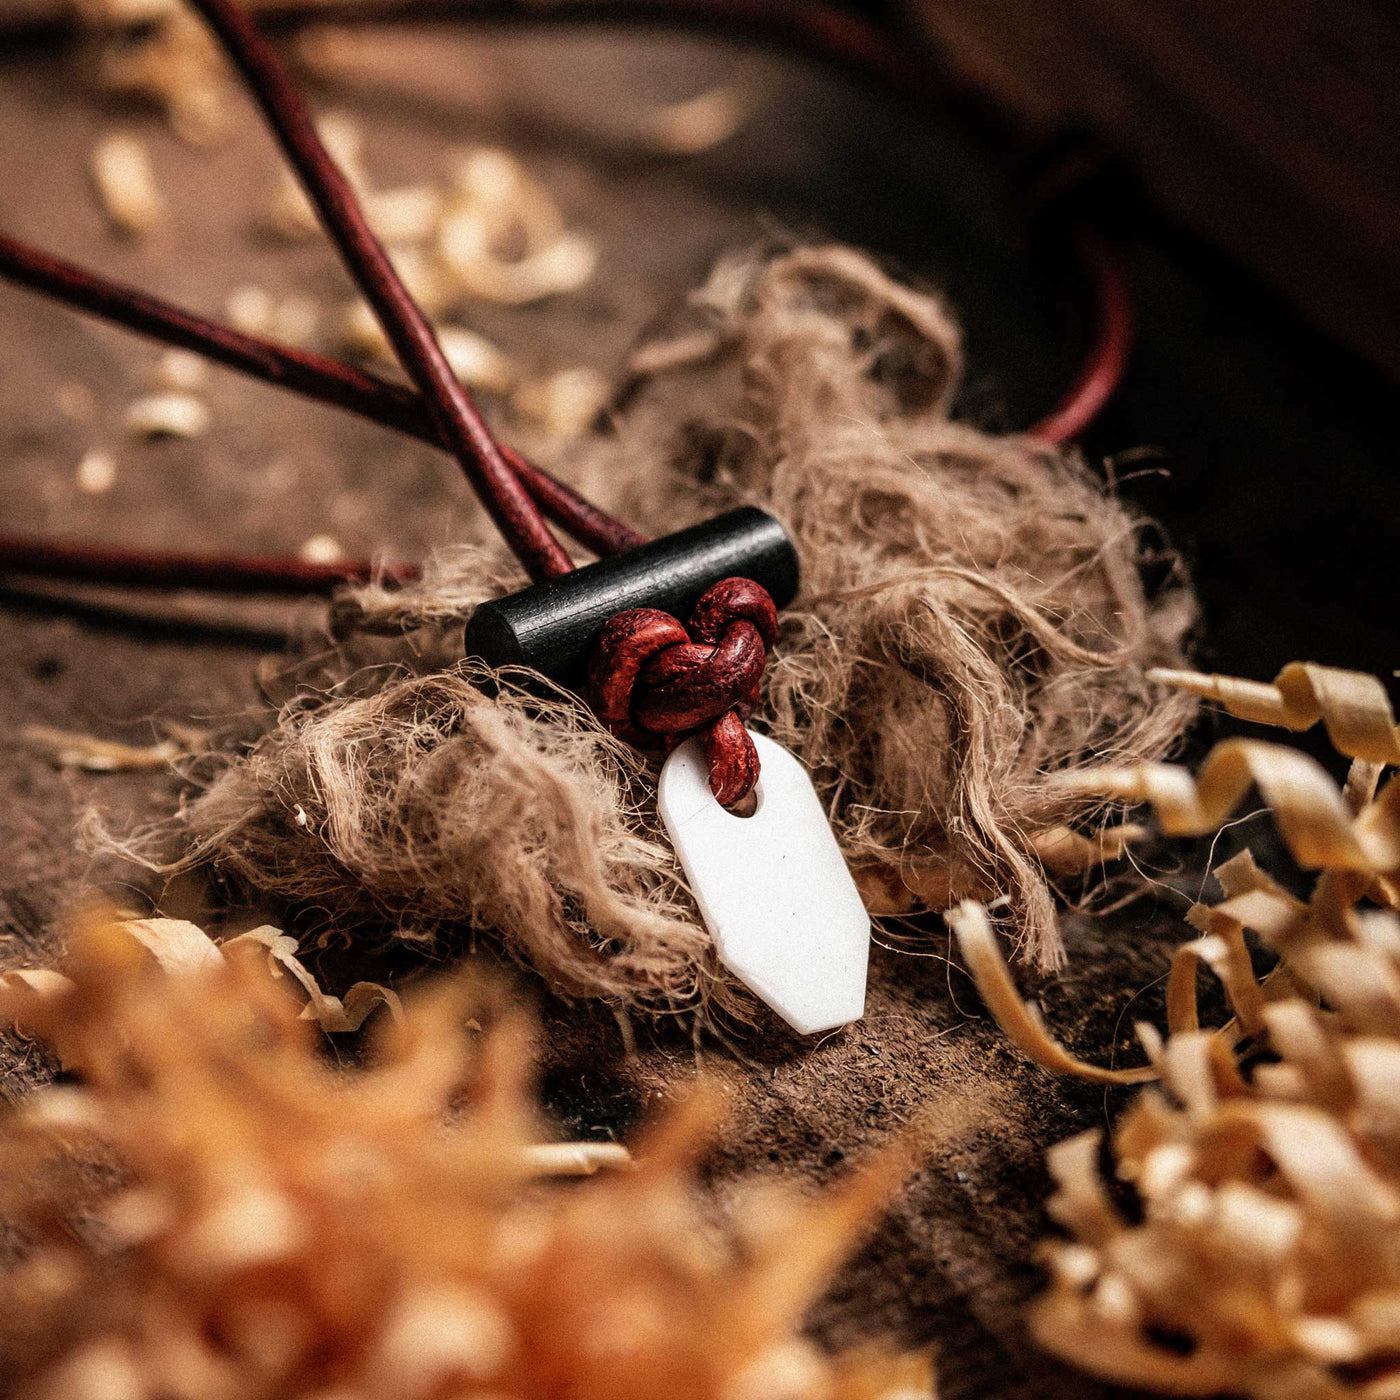 Many tinder sources with the Wazoo Bushcraft Necklace for fire starting with white ceramic